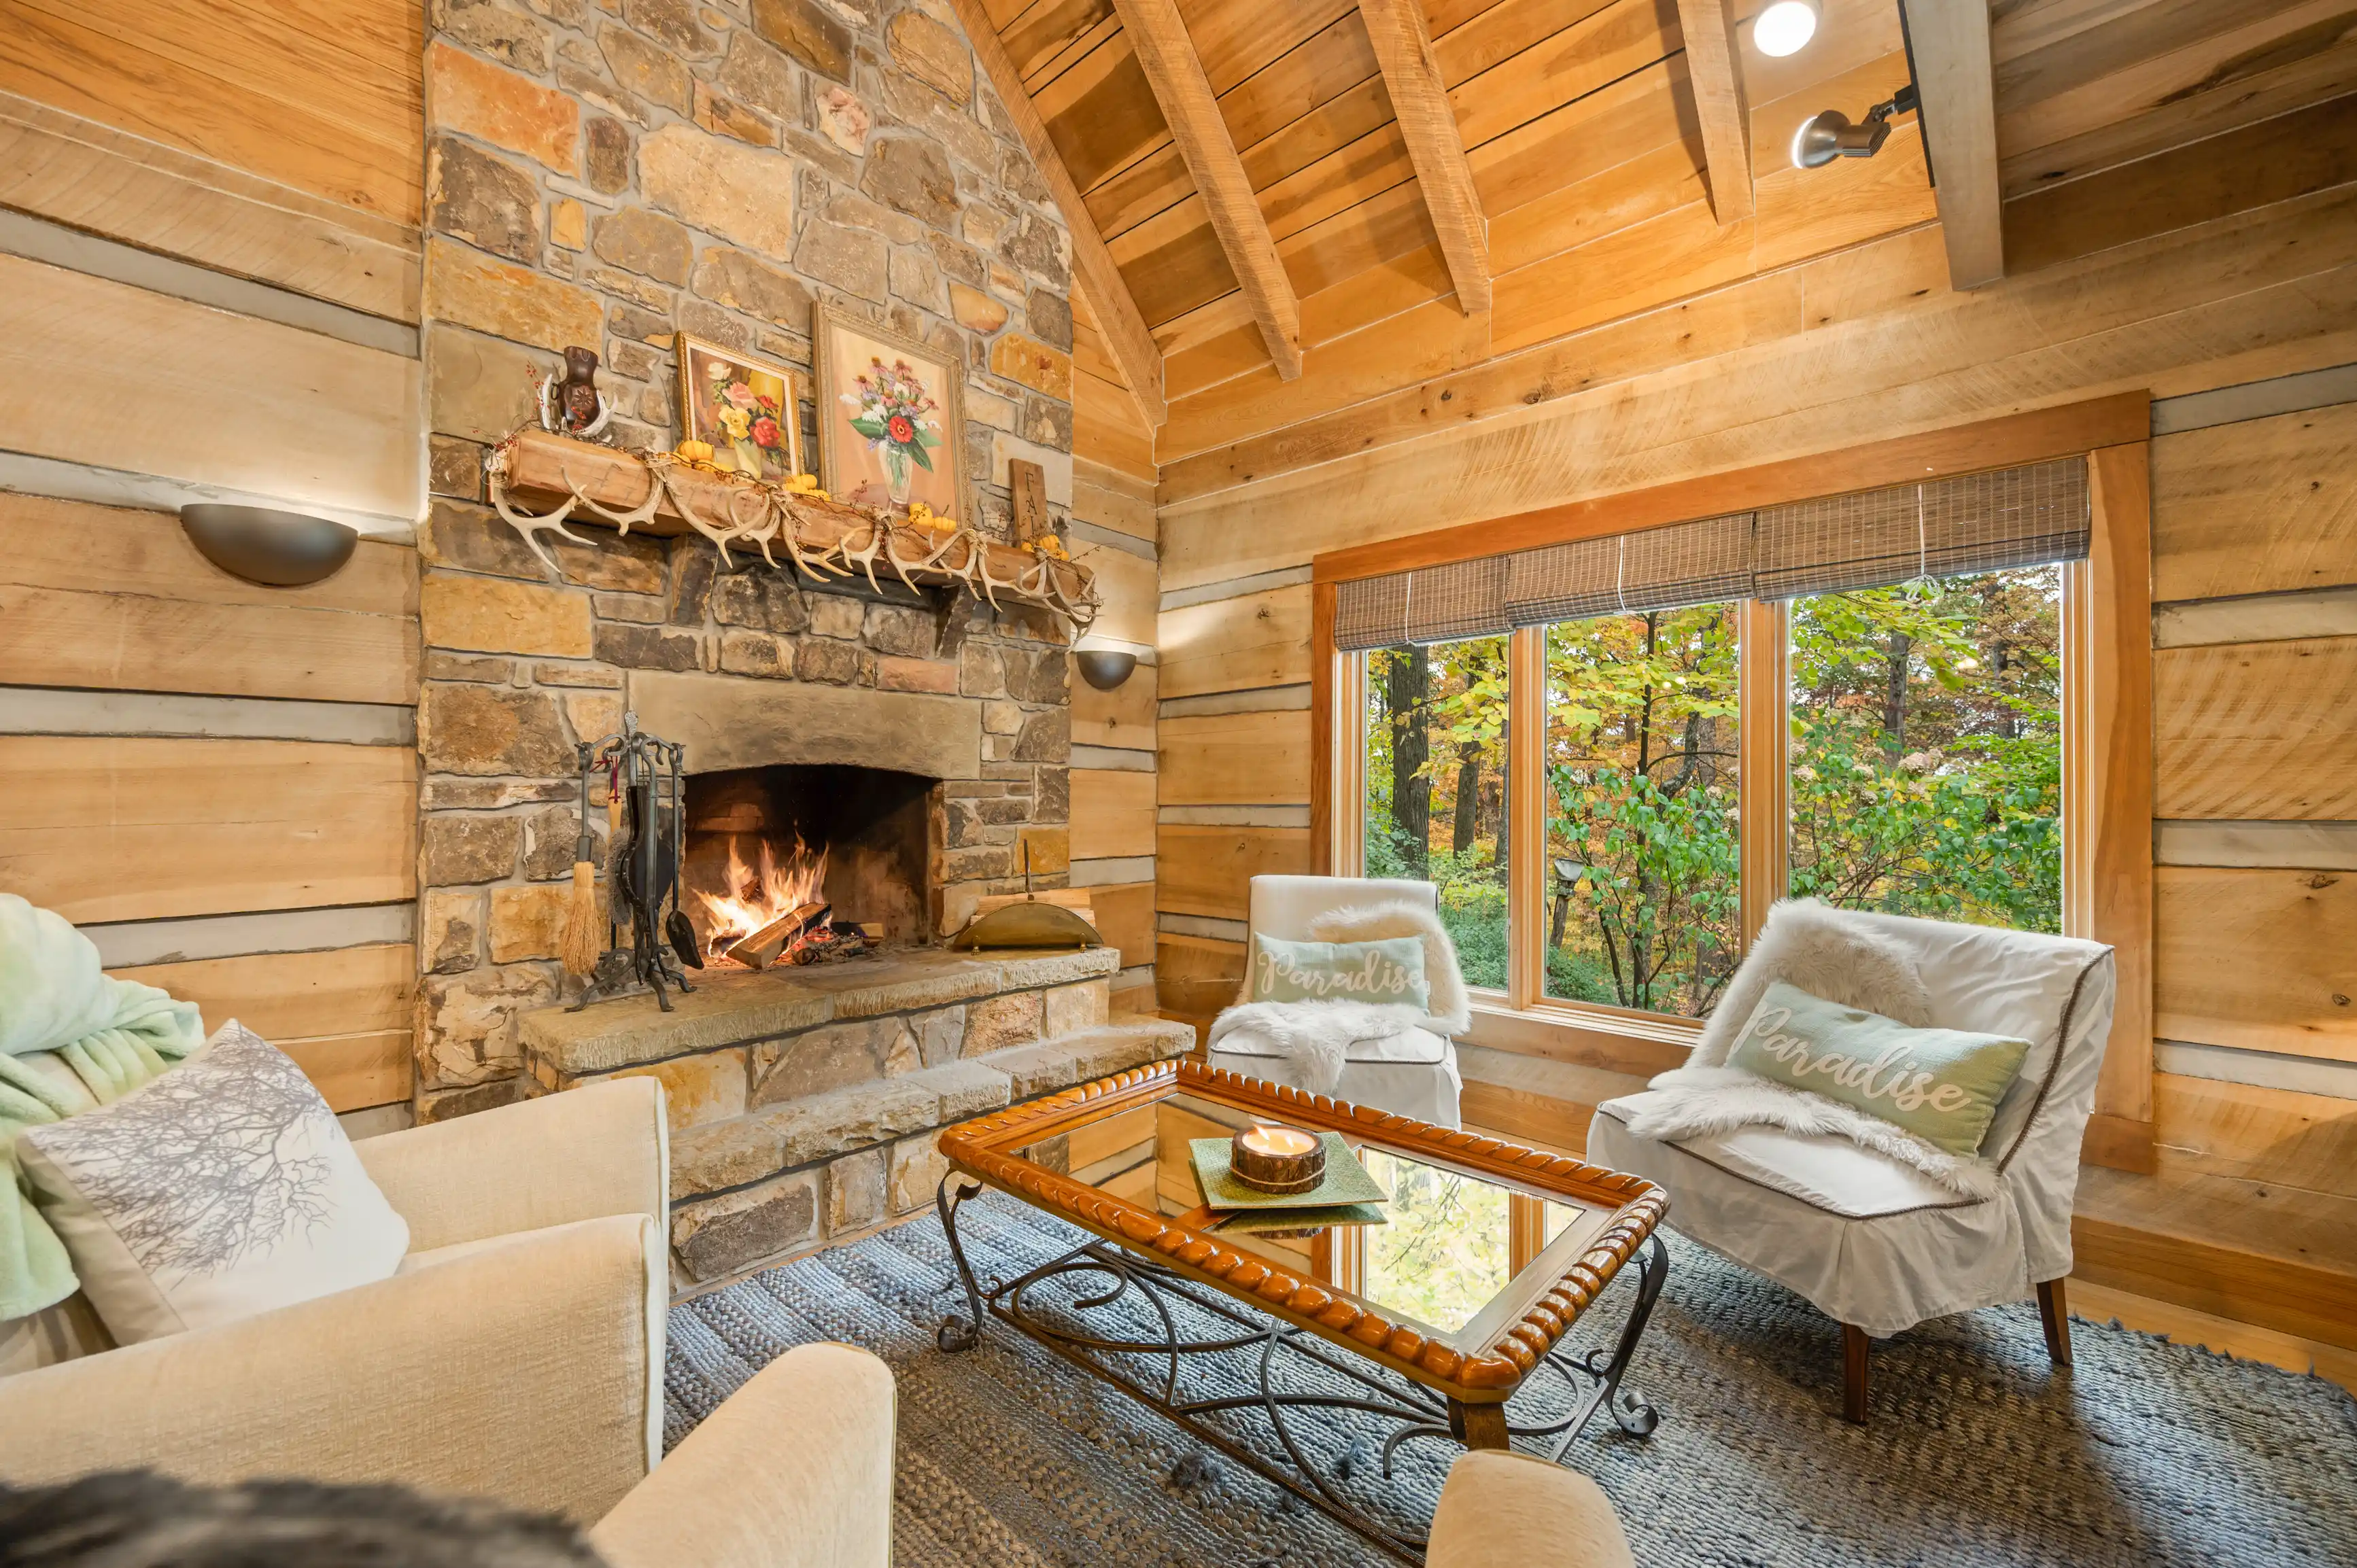 Cozy cabin living room with a stone fireplace, wooden walls, beamed ceiling, and a window view of autumn foliage.